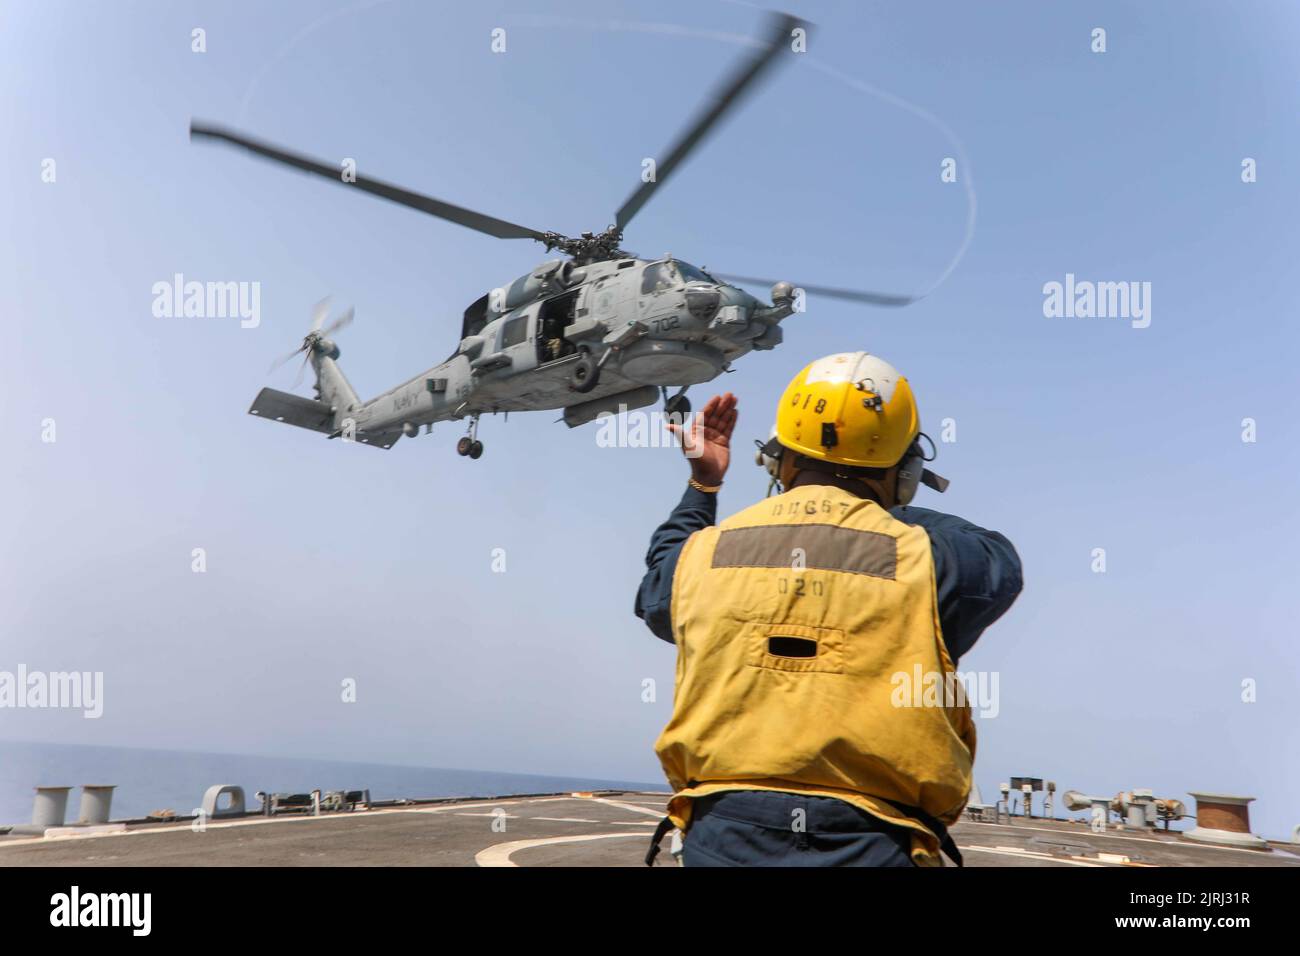 220818-N-CS075-1018 MEDITERRANEAN SEA (August, 18, 2022) Boatswain’s Mate 2nd Class Jerome Carlie, from Augusta, Georgia, signals to an MH-60S Seahawk helicopter, attached to the “Dragonslayers” of Helicopter Sea Combat Squadron (HSC) 11, aboard the Arleigh Burke-class guided-missile destroyer USS Cole (DDG 67) in the Mediterranean Sea, August 18, 2022. Cole is part of the Harry S. Truman Carrier Strike Group and is on a scheduled deployment in the U.S. Naval Forces Europe area of operations, employed by U.S. Sixth Fleet to defend U.S., allied and partner interests. (U.S. Navy Photo by Mass Co Stock Photo